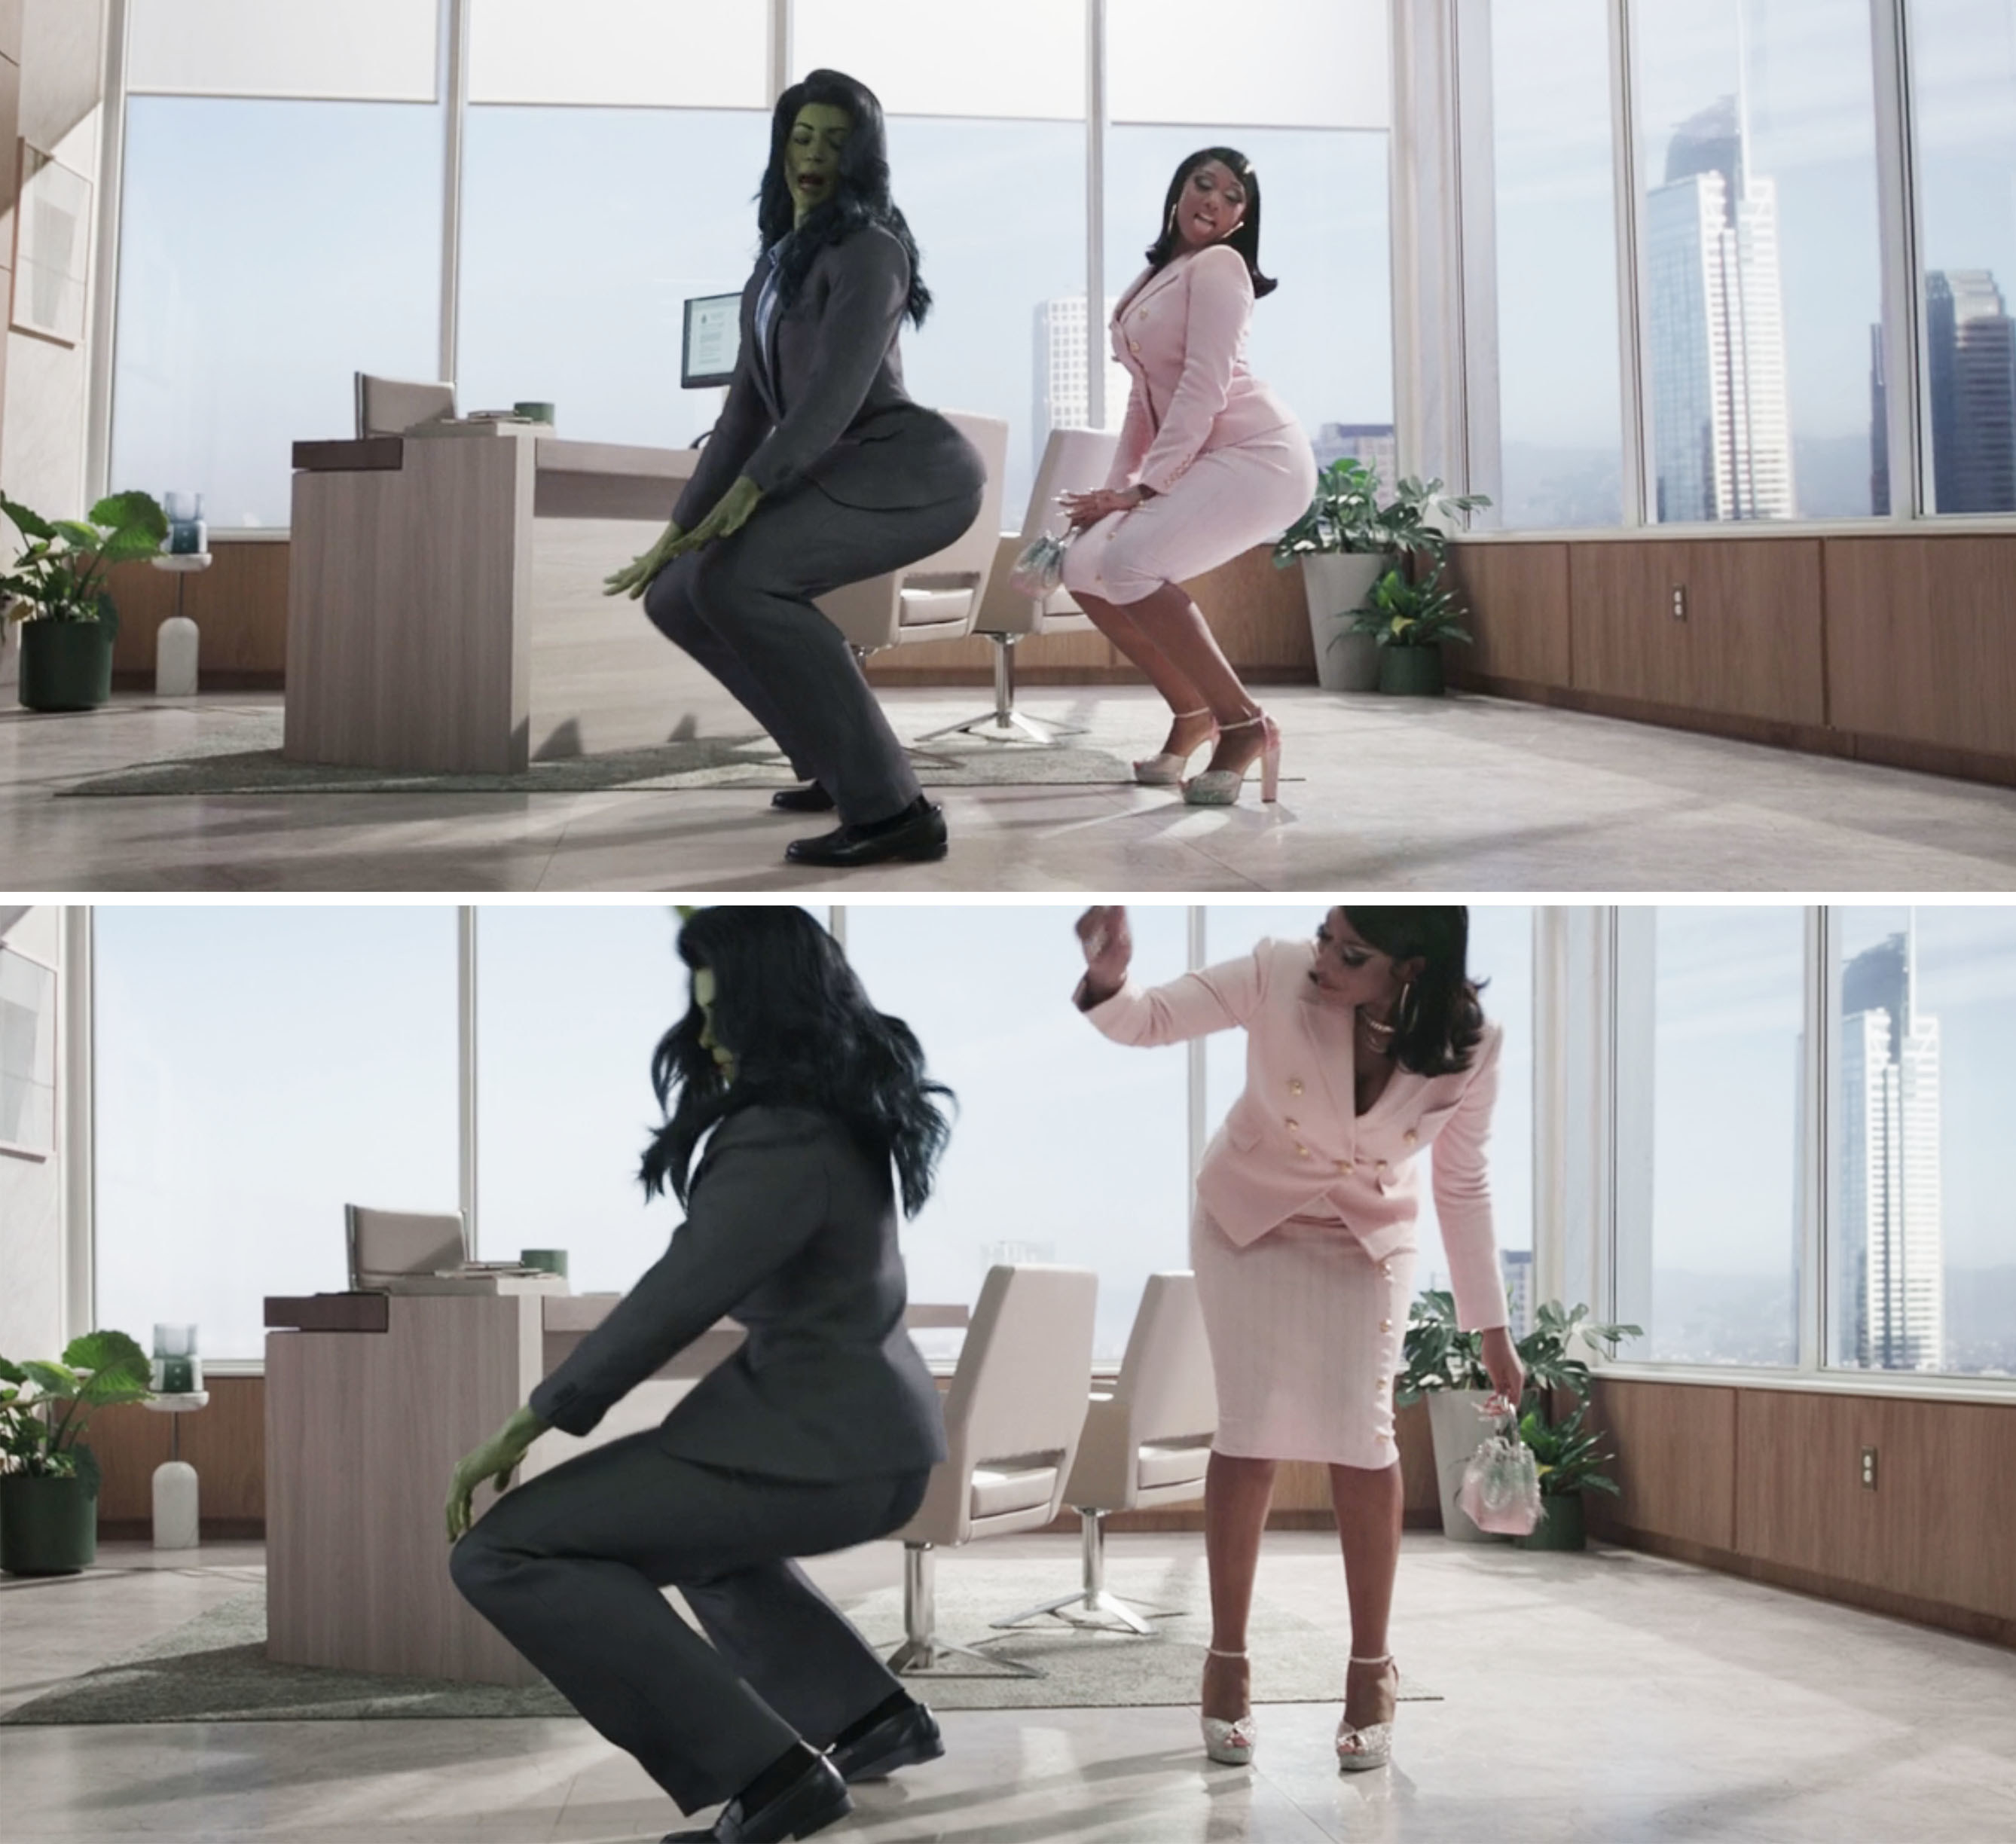 megan and she-hulk dancing in the office